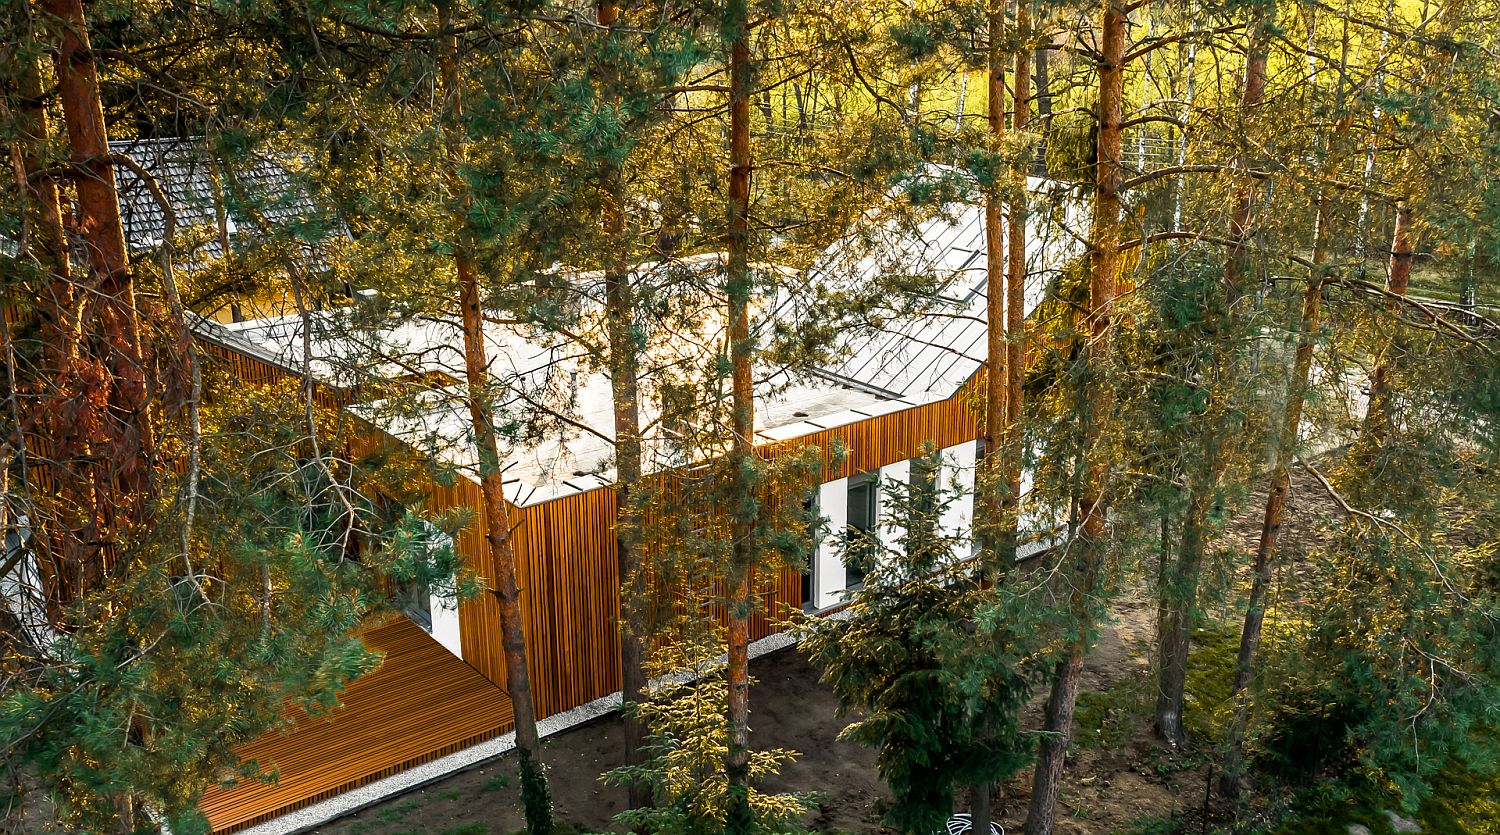 View of the forest house from above